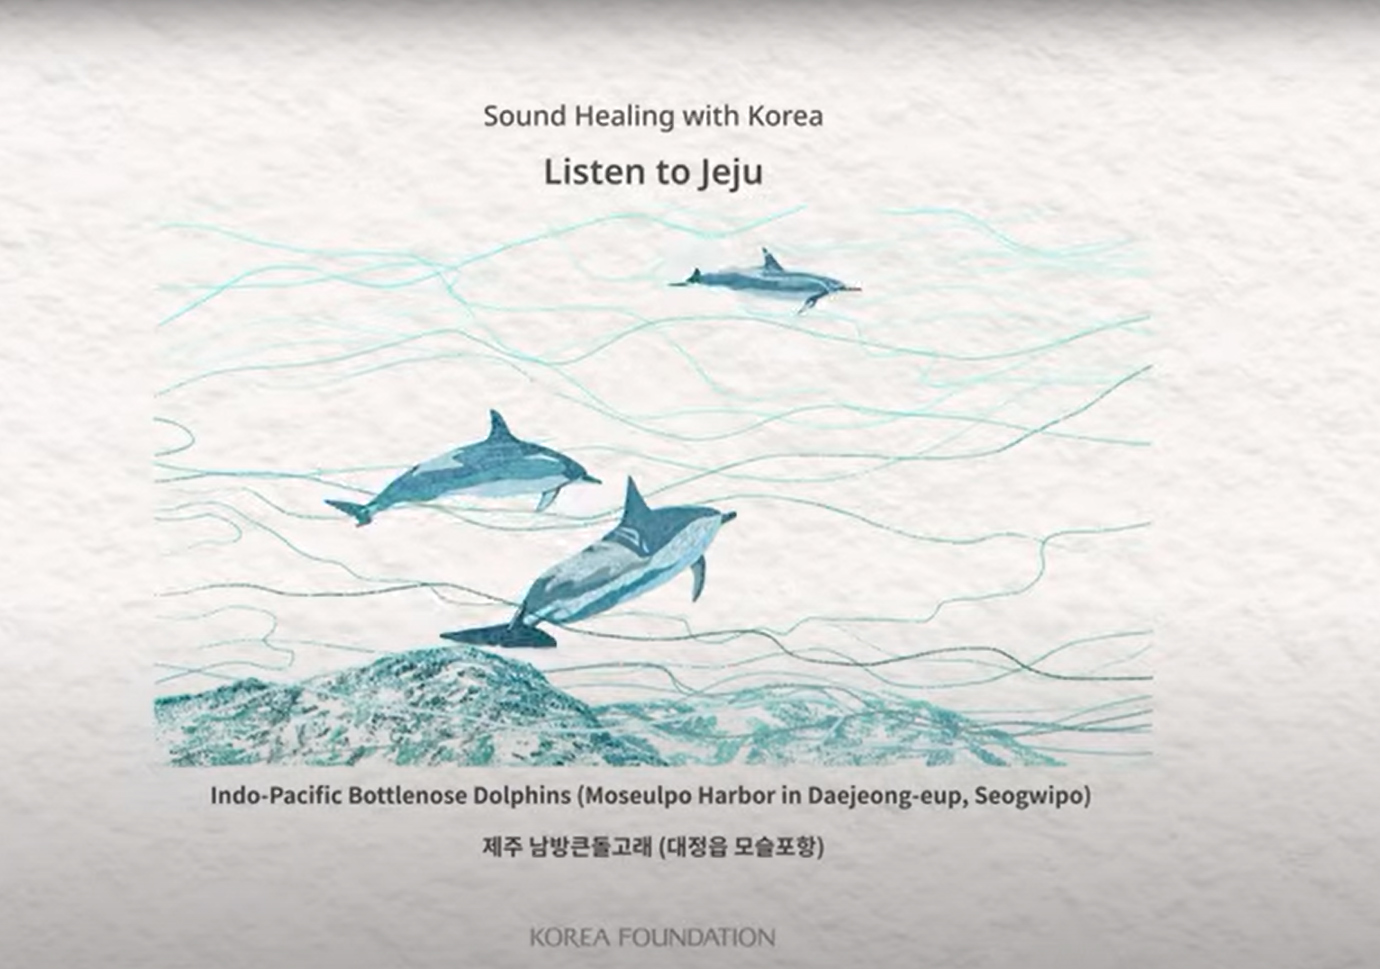 [ASMR] 2021 Sound Healing with Korea - Listen to <font color='red'>Jeju</font> | 3. Indo-Pacific Bottlenose Dolphins